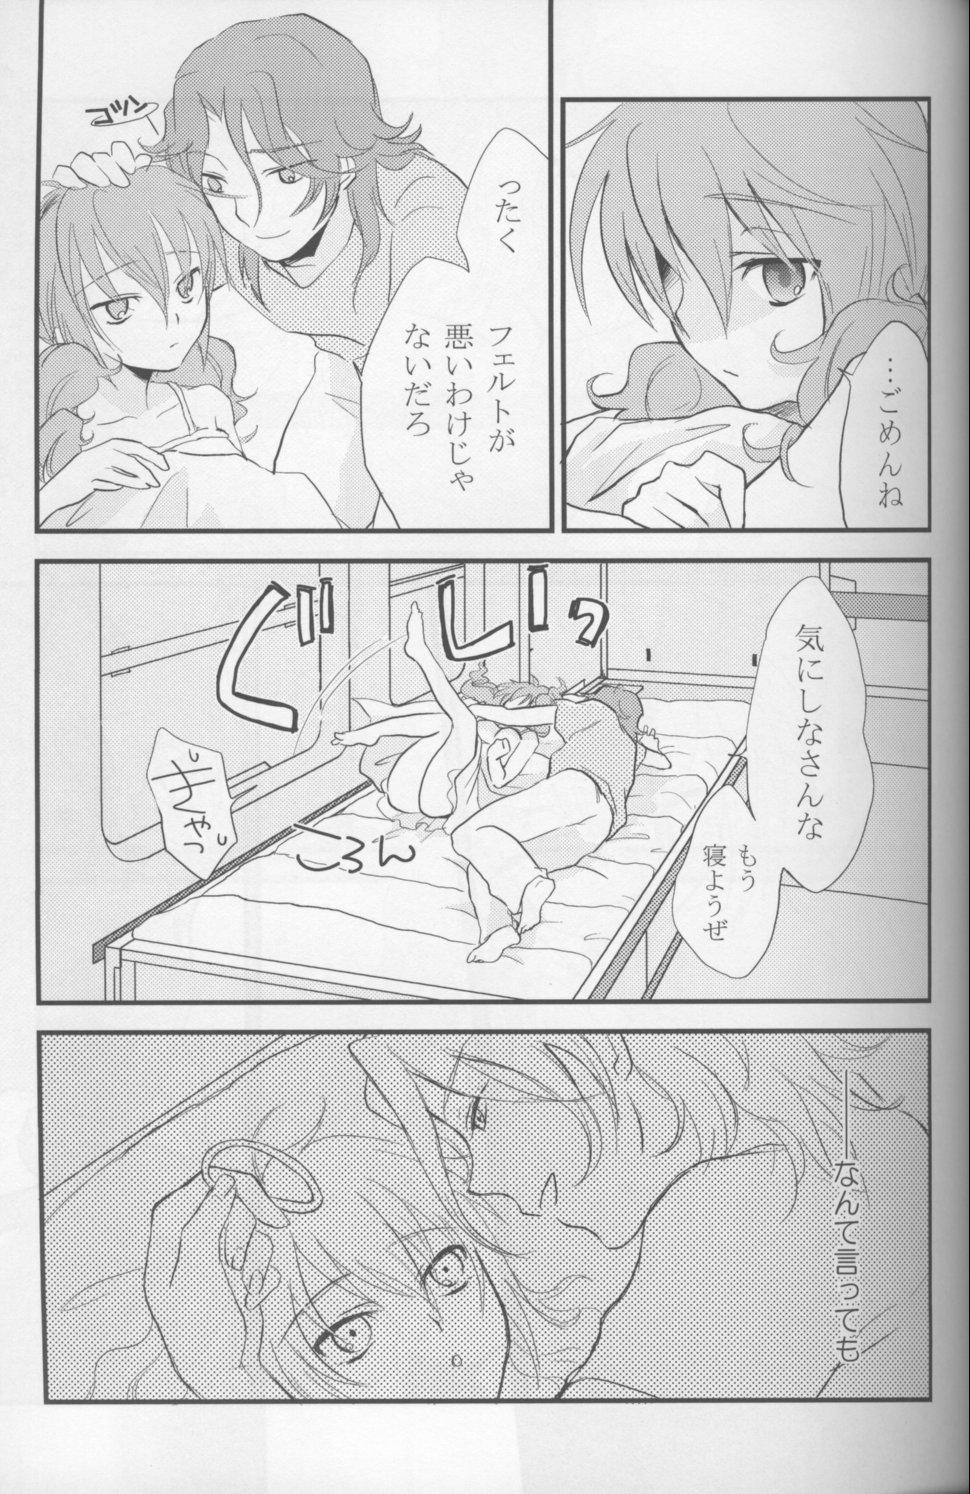 Candid Touch Me - Gundam 00 Lesbians - Page 6